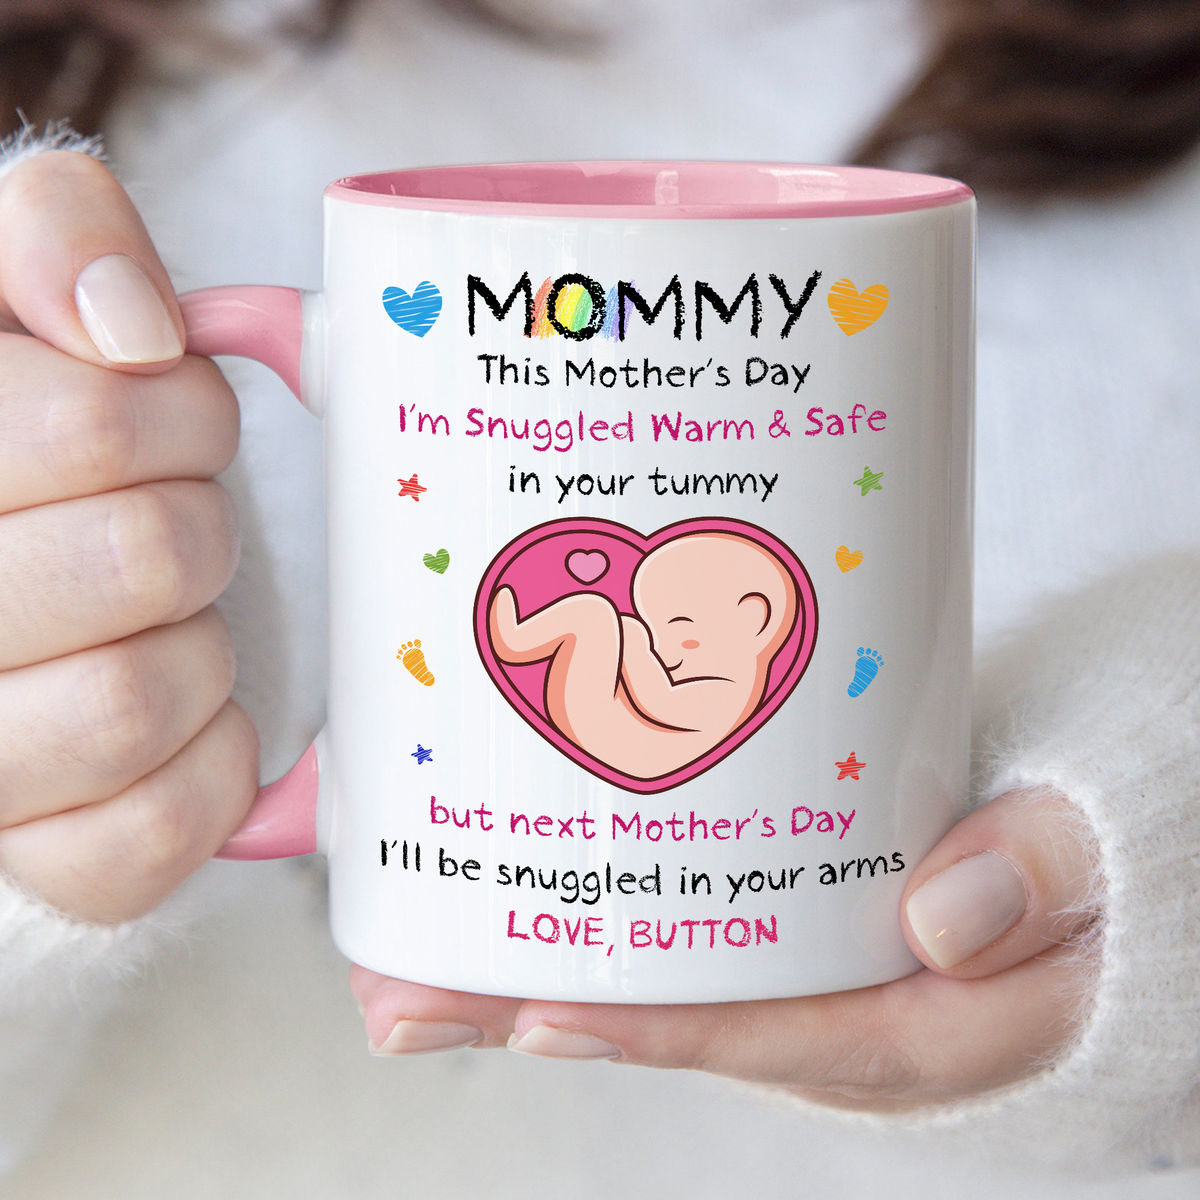 Personalized Mug - From The Bump - Mommy, This Mother's Day I'm Snuggled Warm & Safe In Your Tummy. But next Mother's Day, I'll be Snuggled in your arms (v2)_2